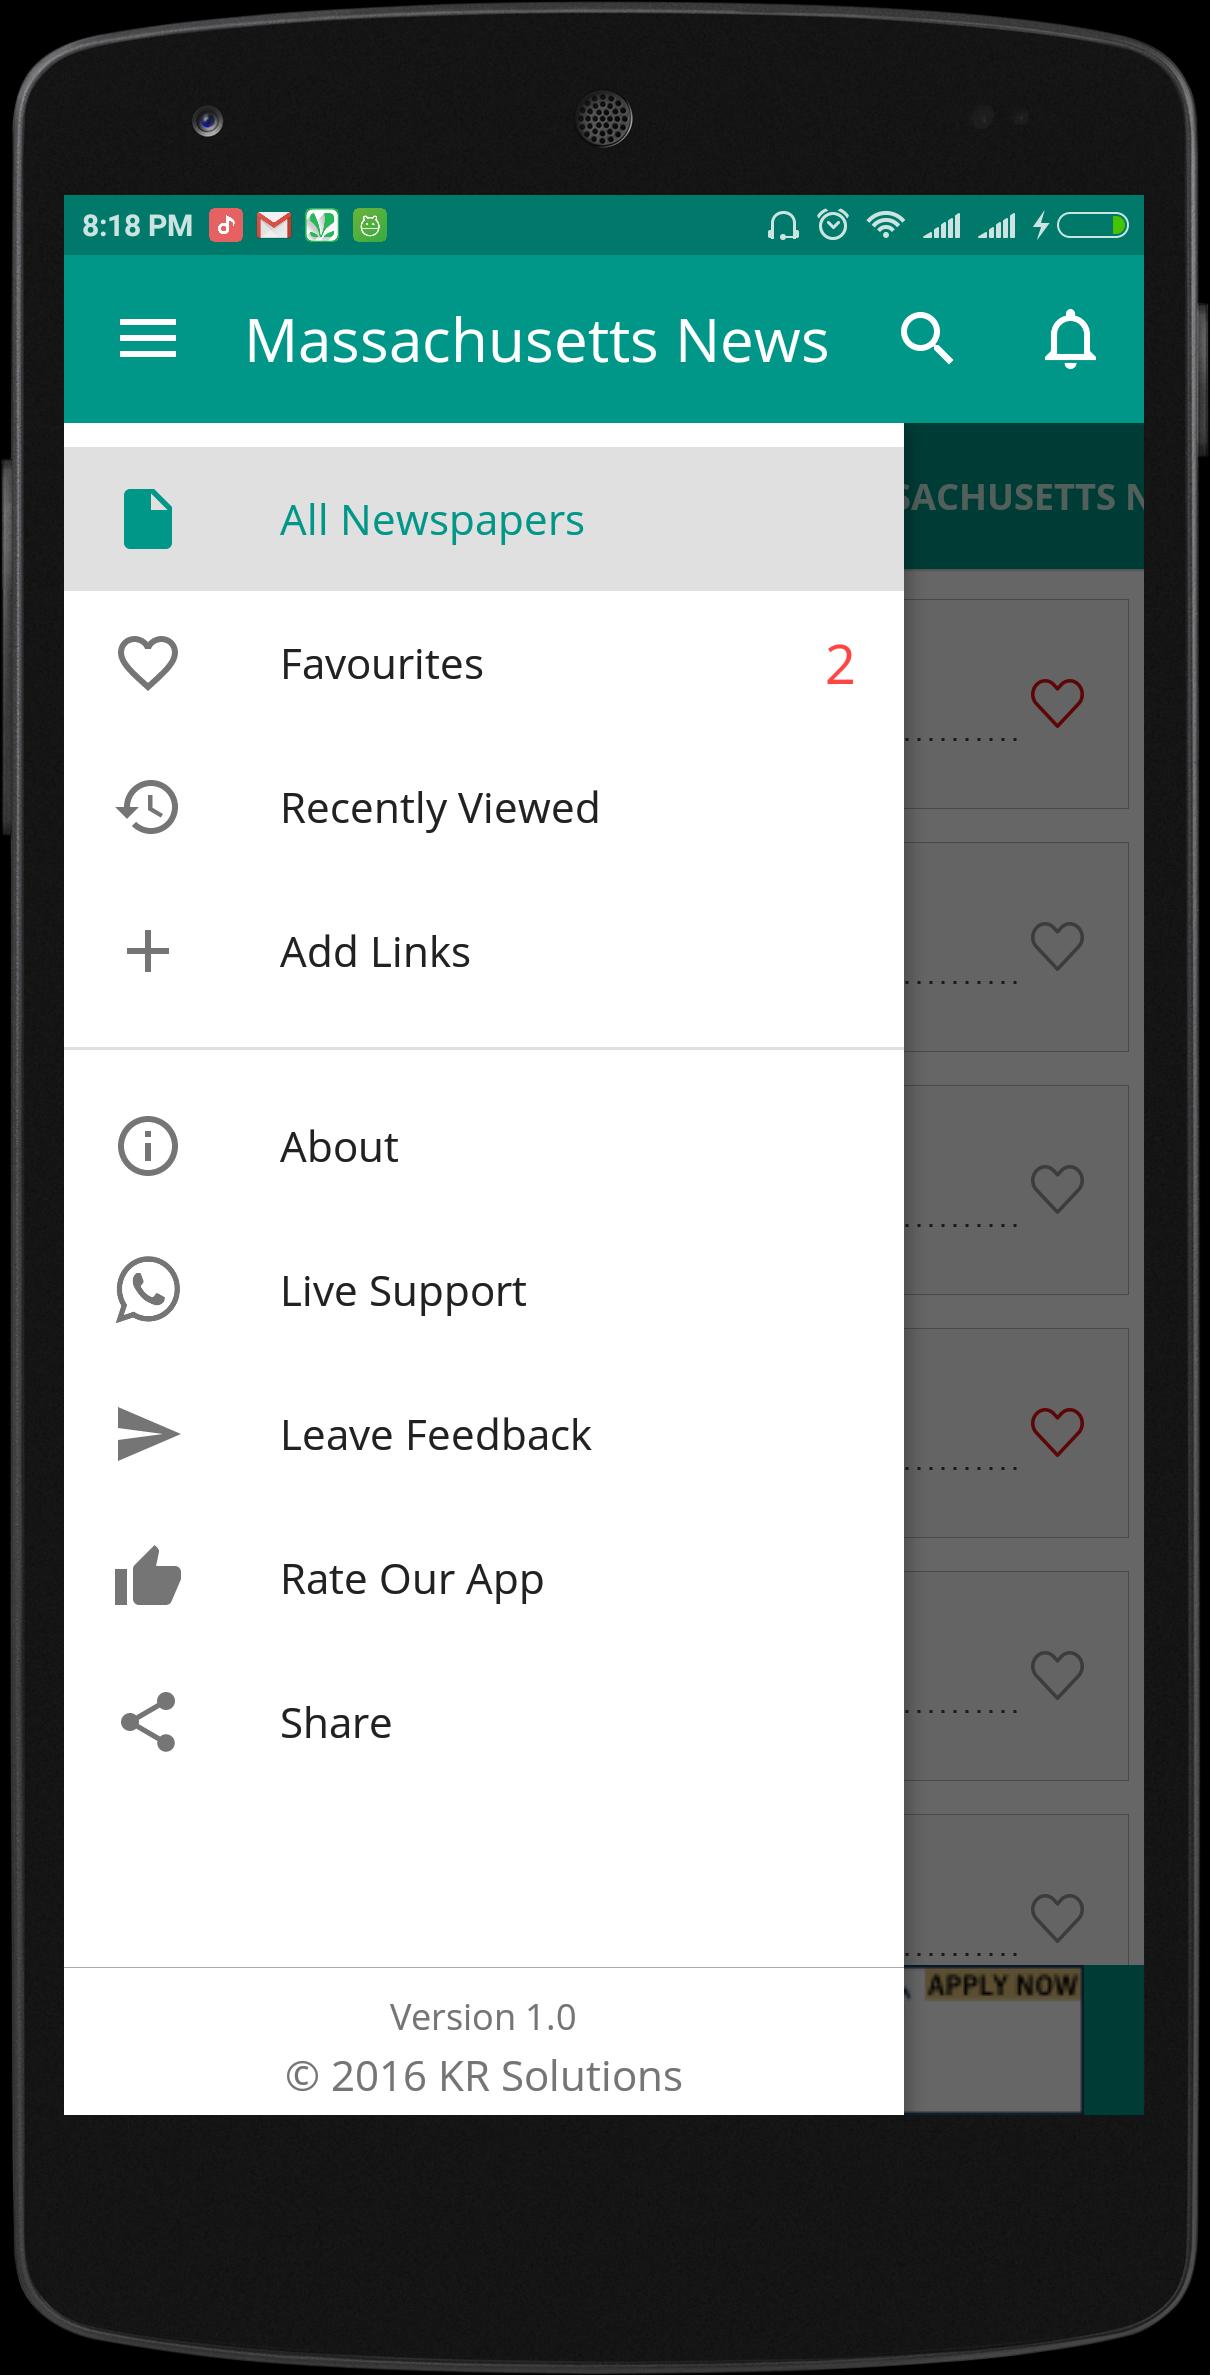 Rate our app. Left supported